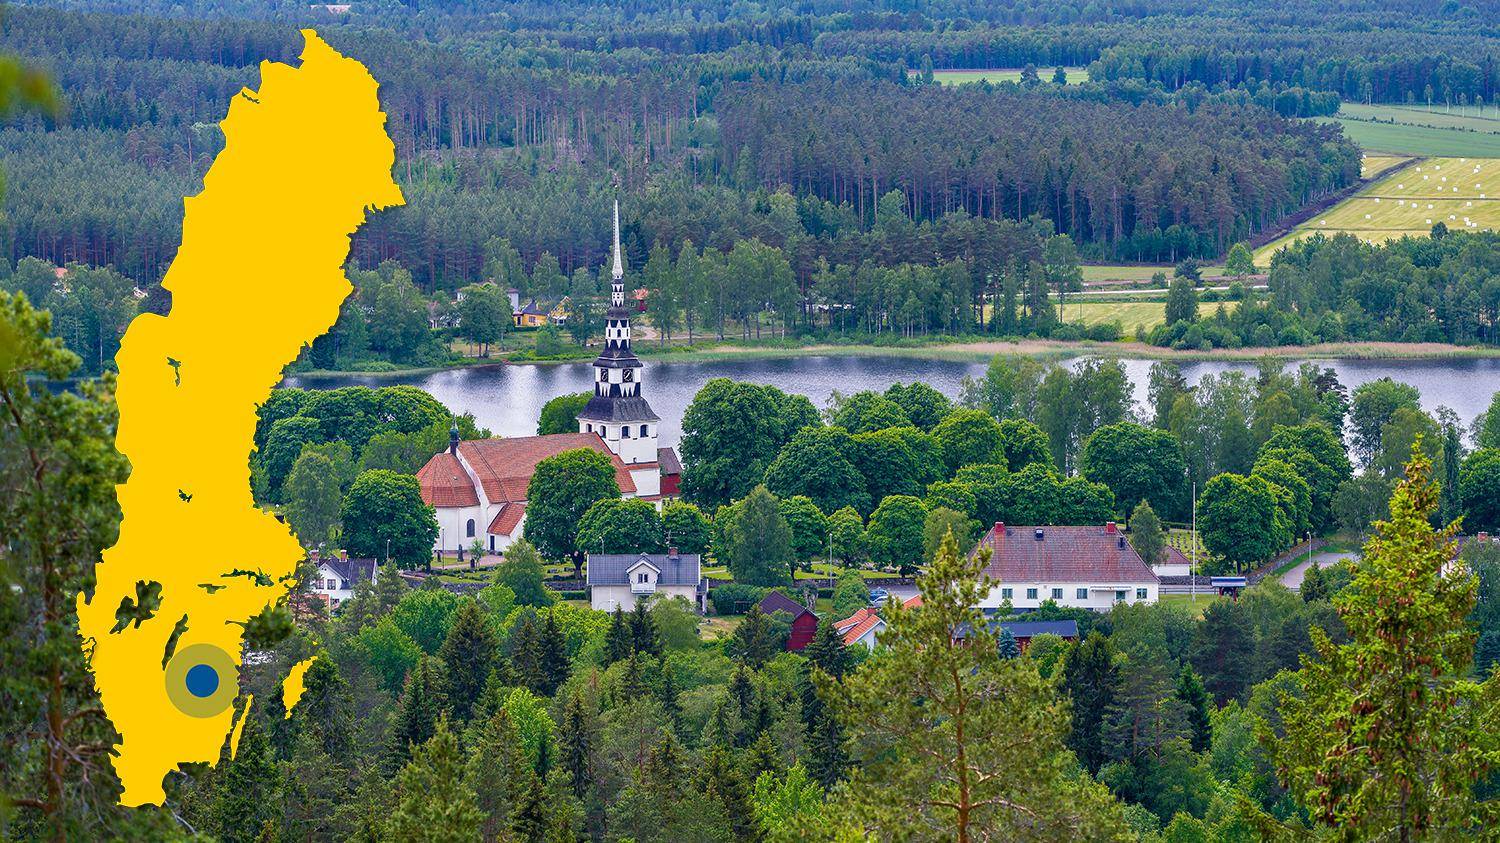 A white church and a couple of houses are surrounded by greenery, fields and a lake. There is a yellow map of Sweden with a blue dot that marks Ingatorp.